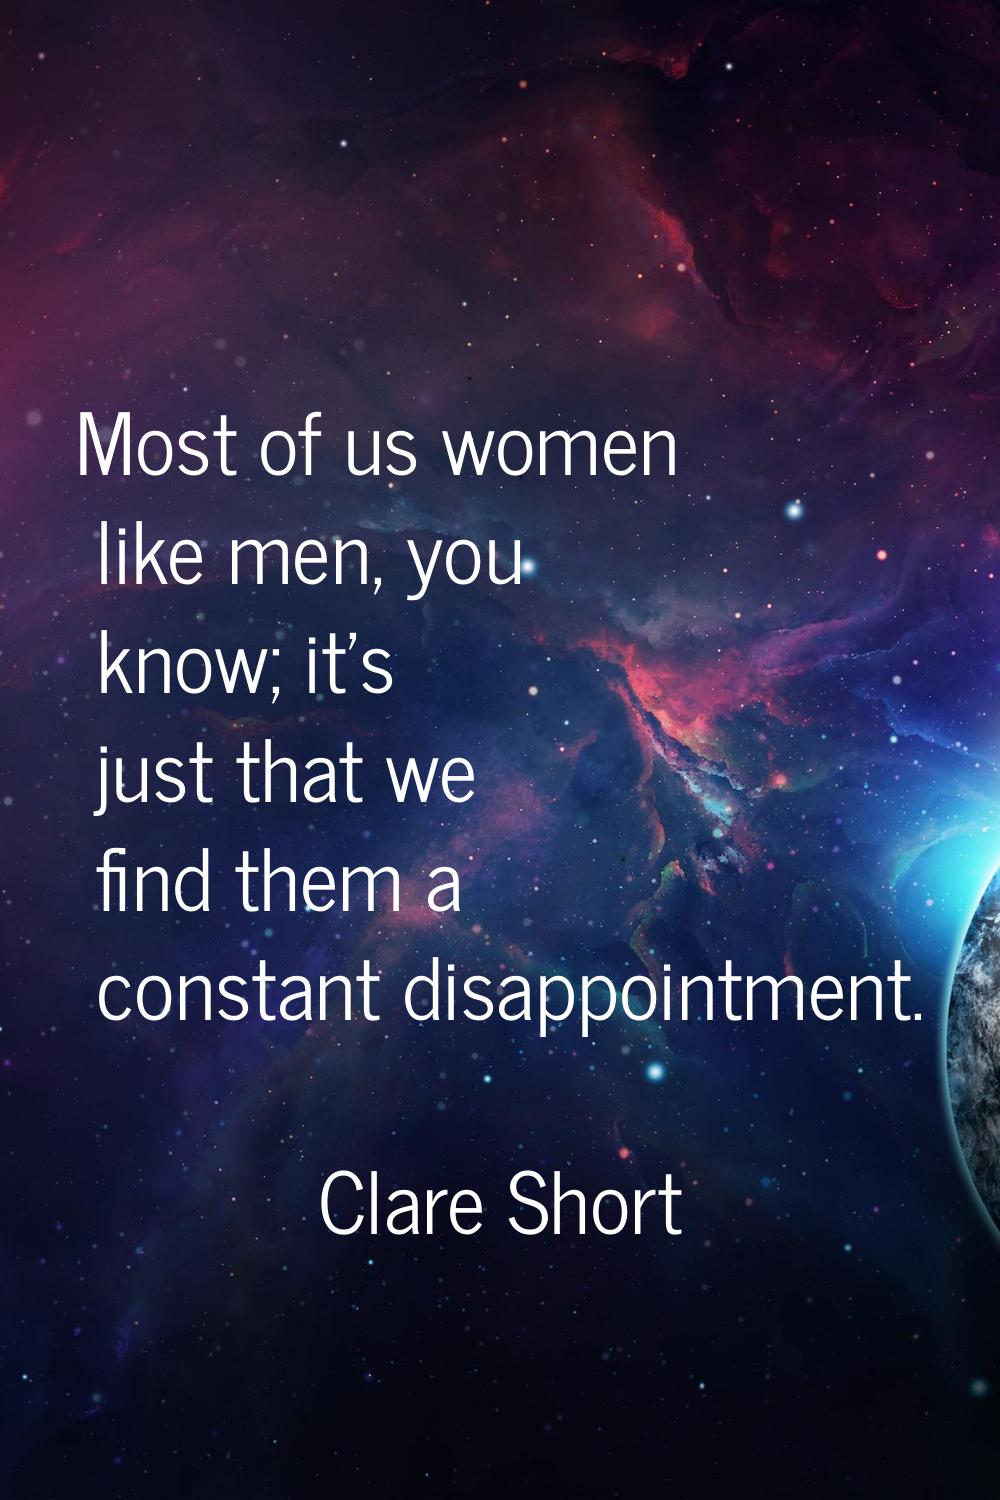 Most of us women like men, you know; it's just that we find them a constant disappointment.